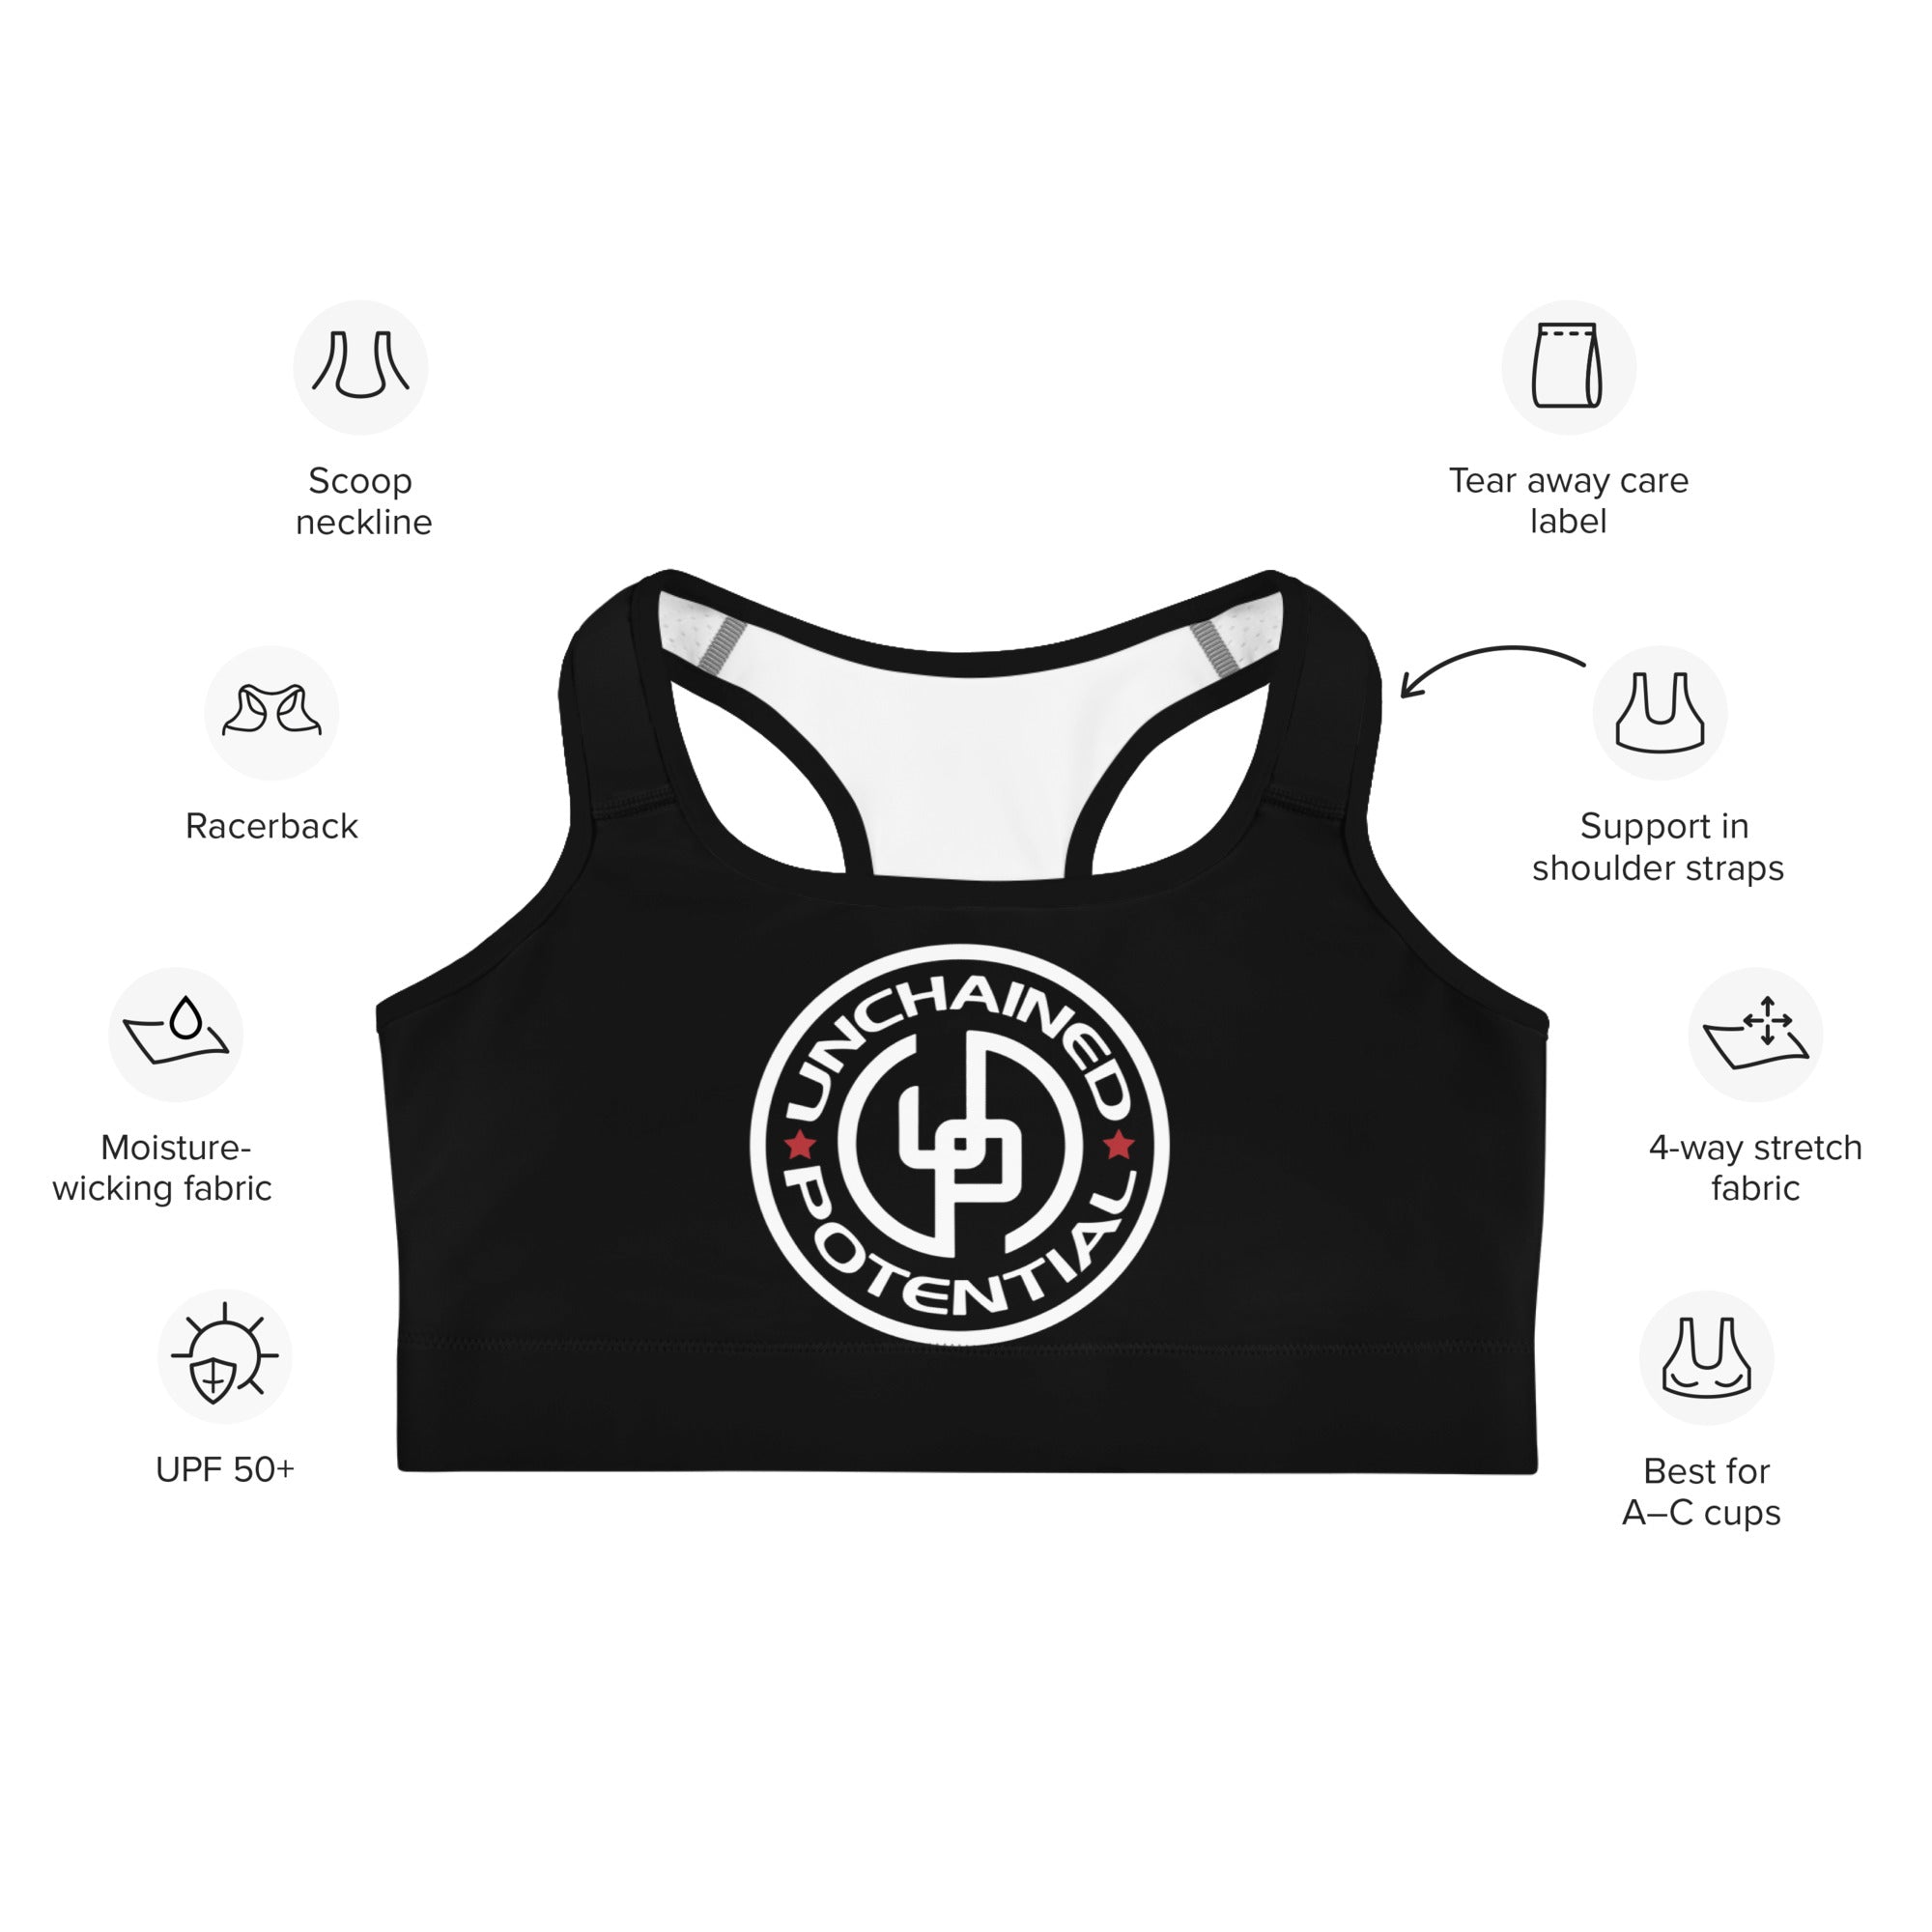 Unchained Potential Sports bra